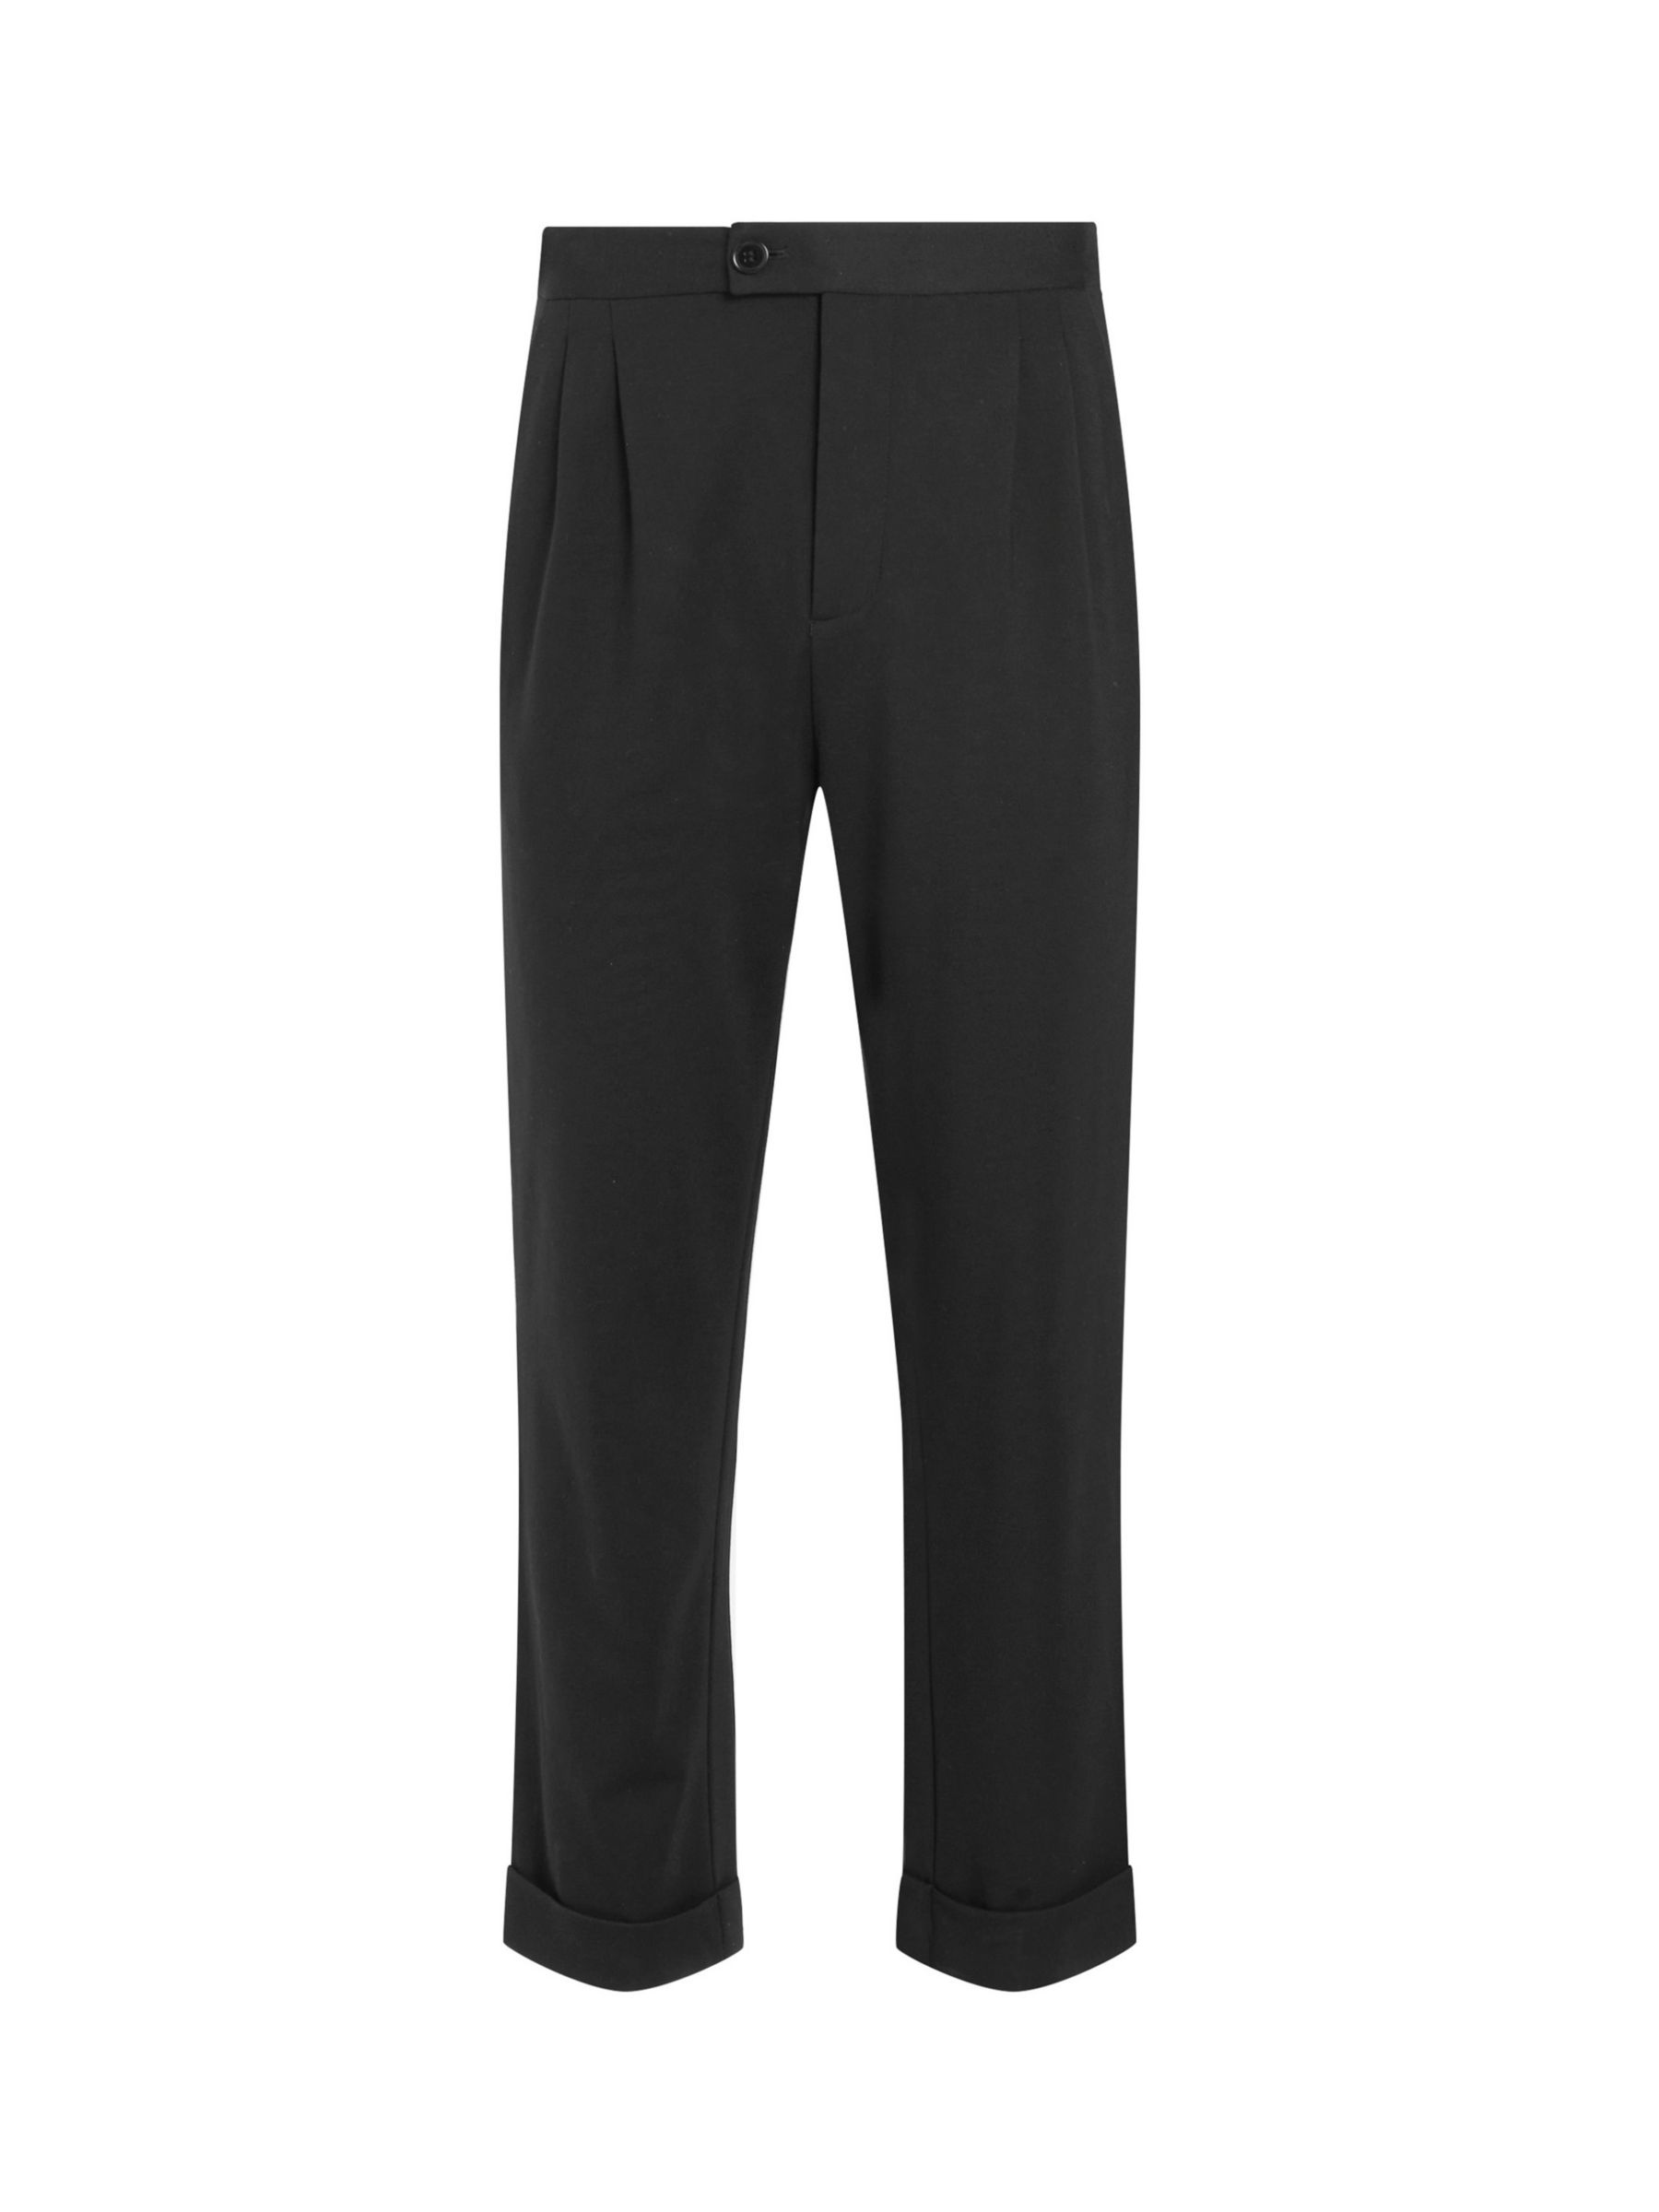 Black Cotton Blend Cargo Trousers – The Helm Clothing